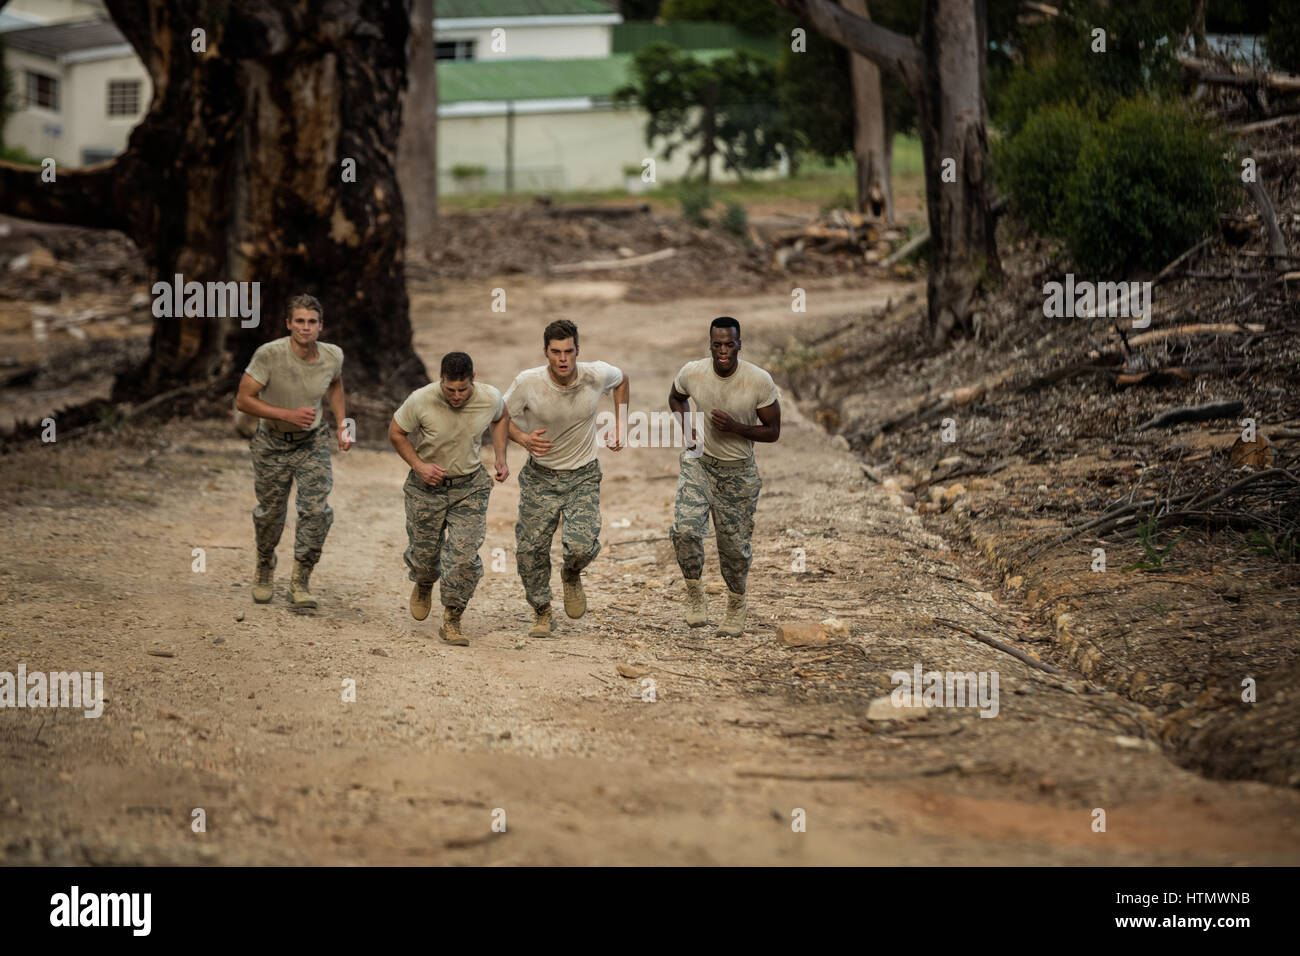 Soldiers running in boot camp Stock Photo